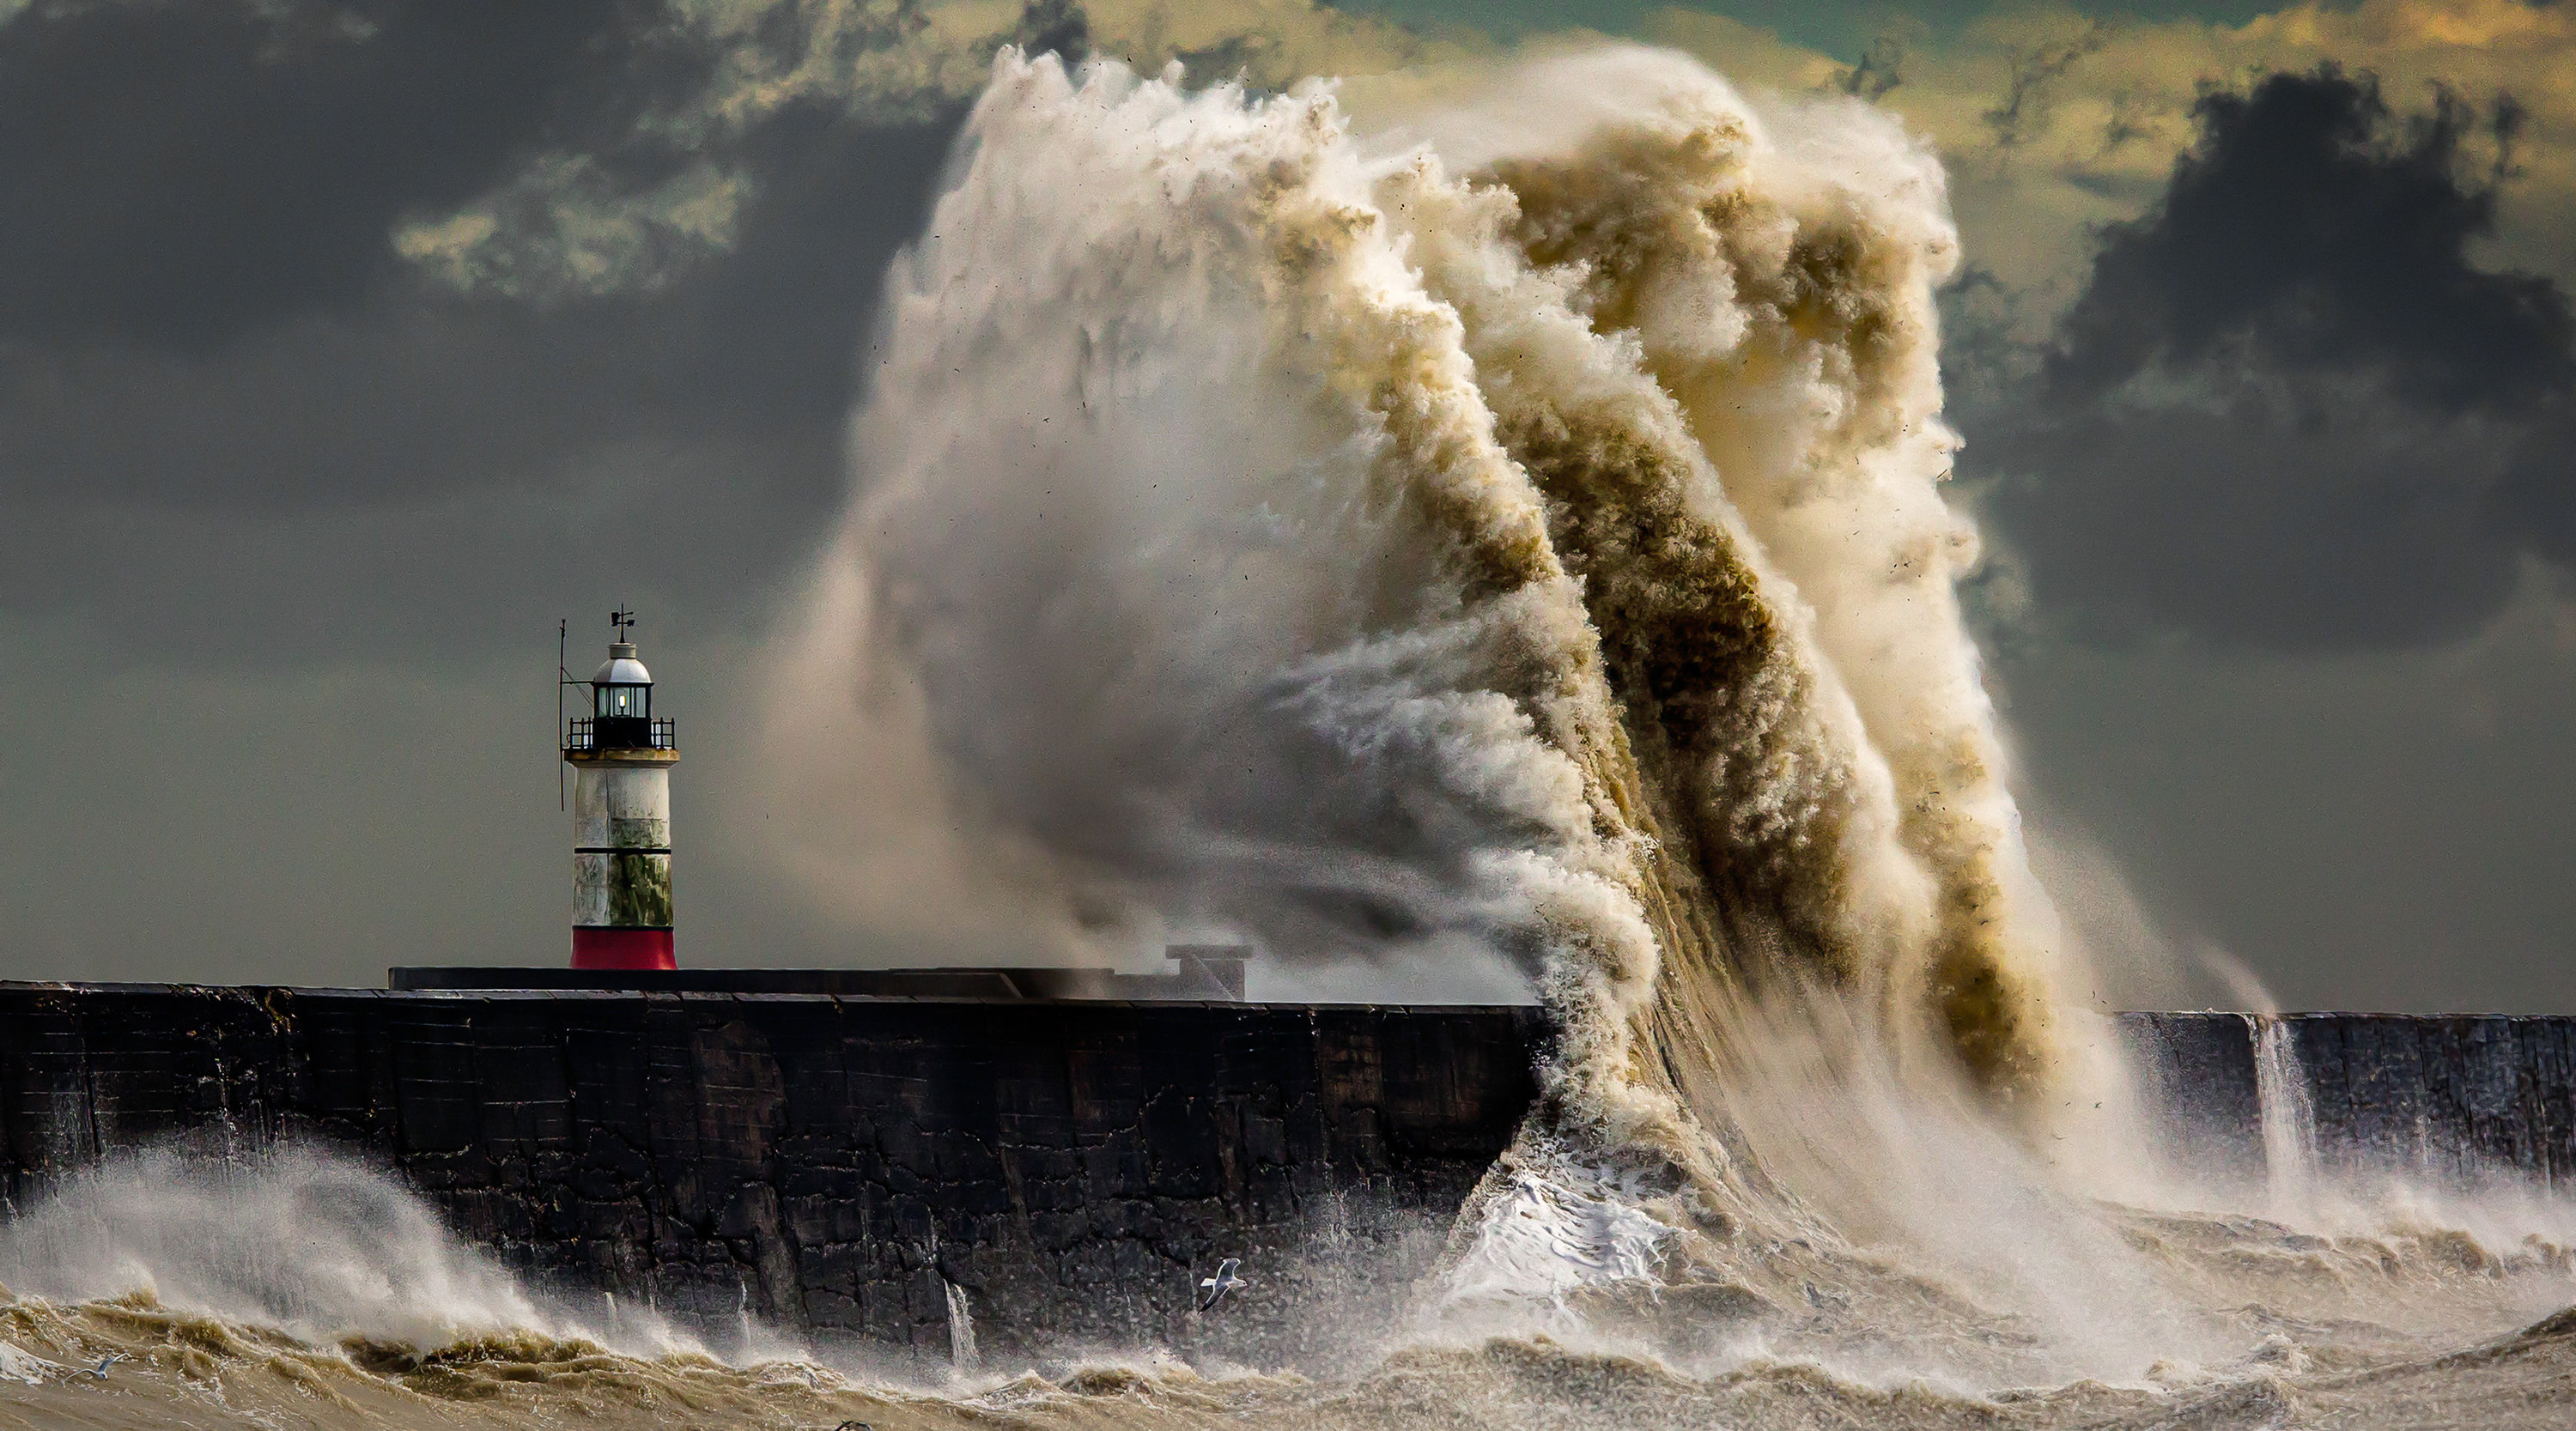 A lighthouse being buffeted by waves in a storm.